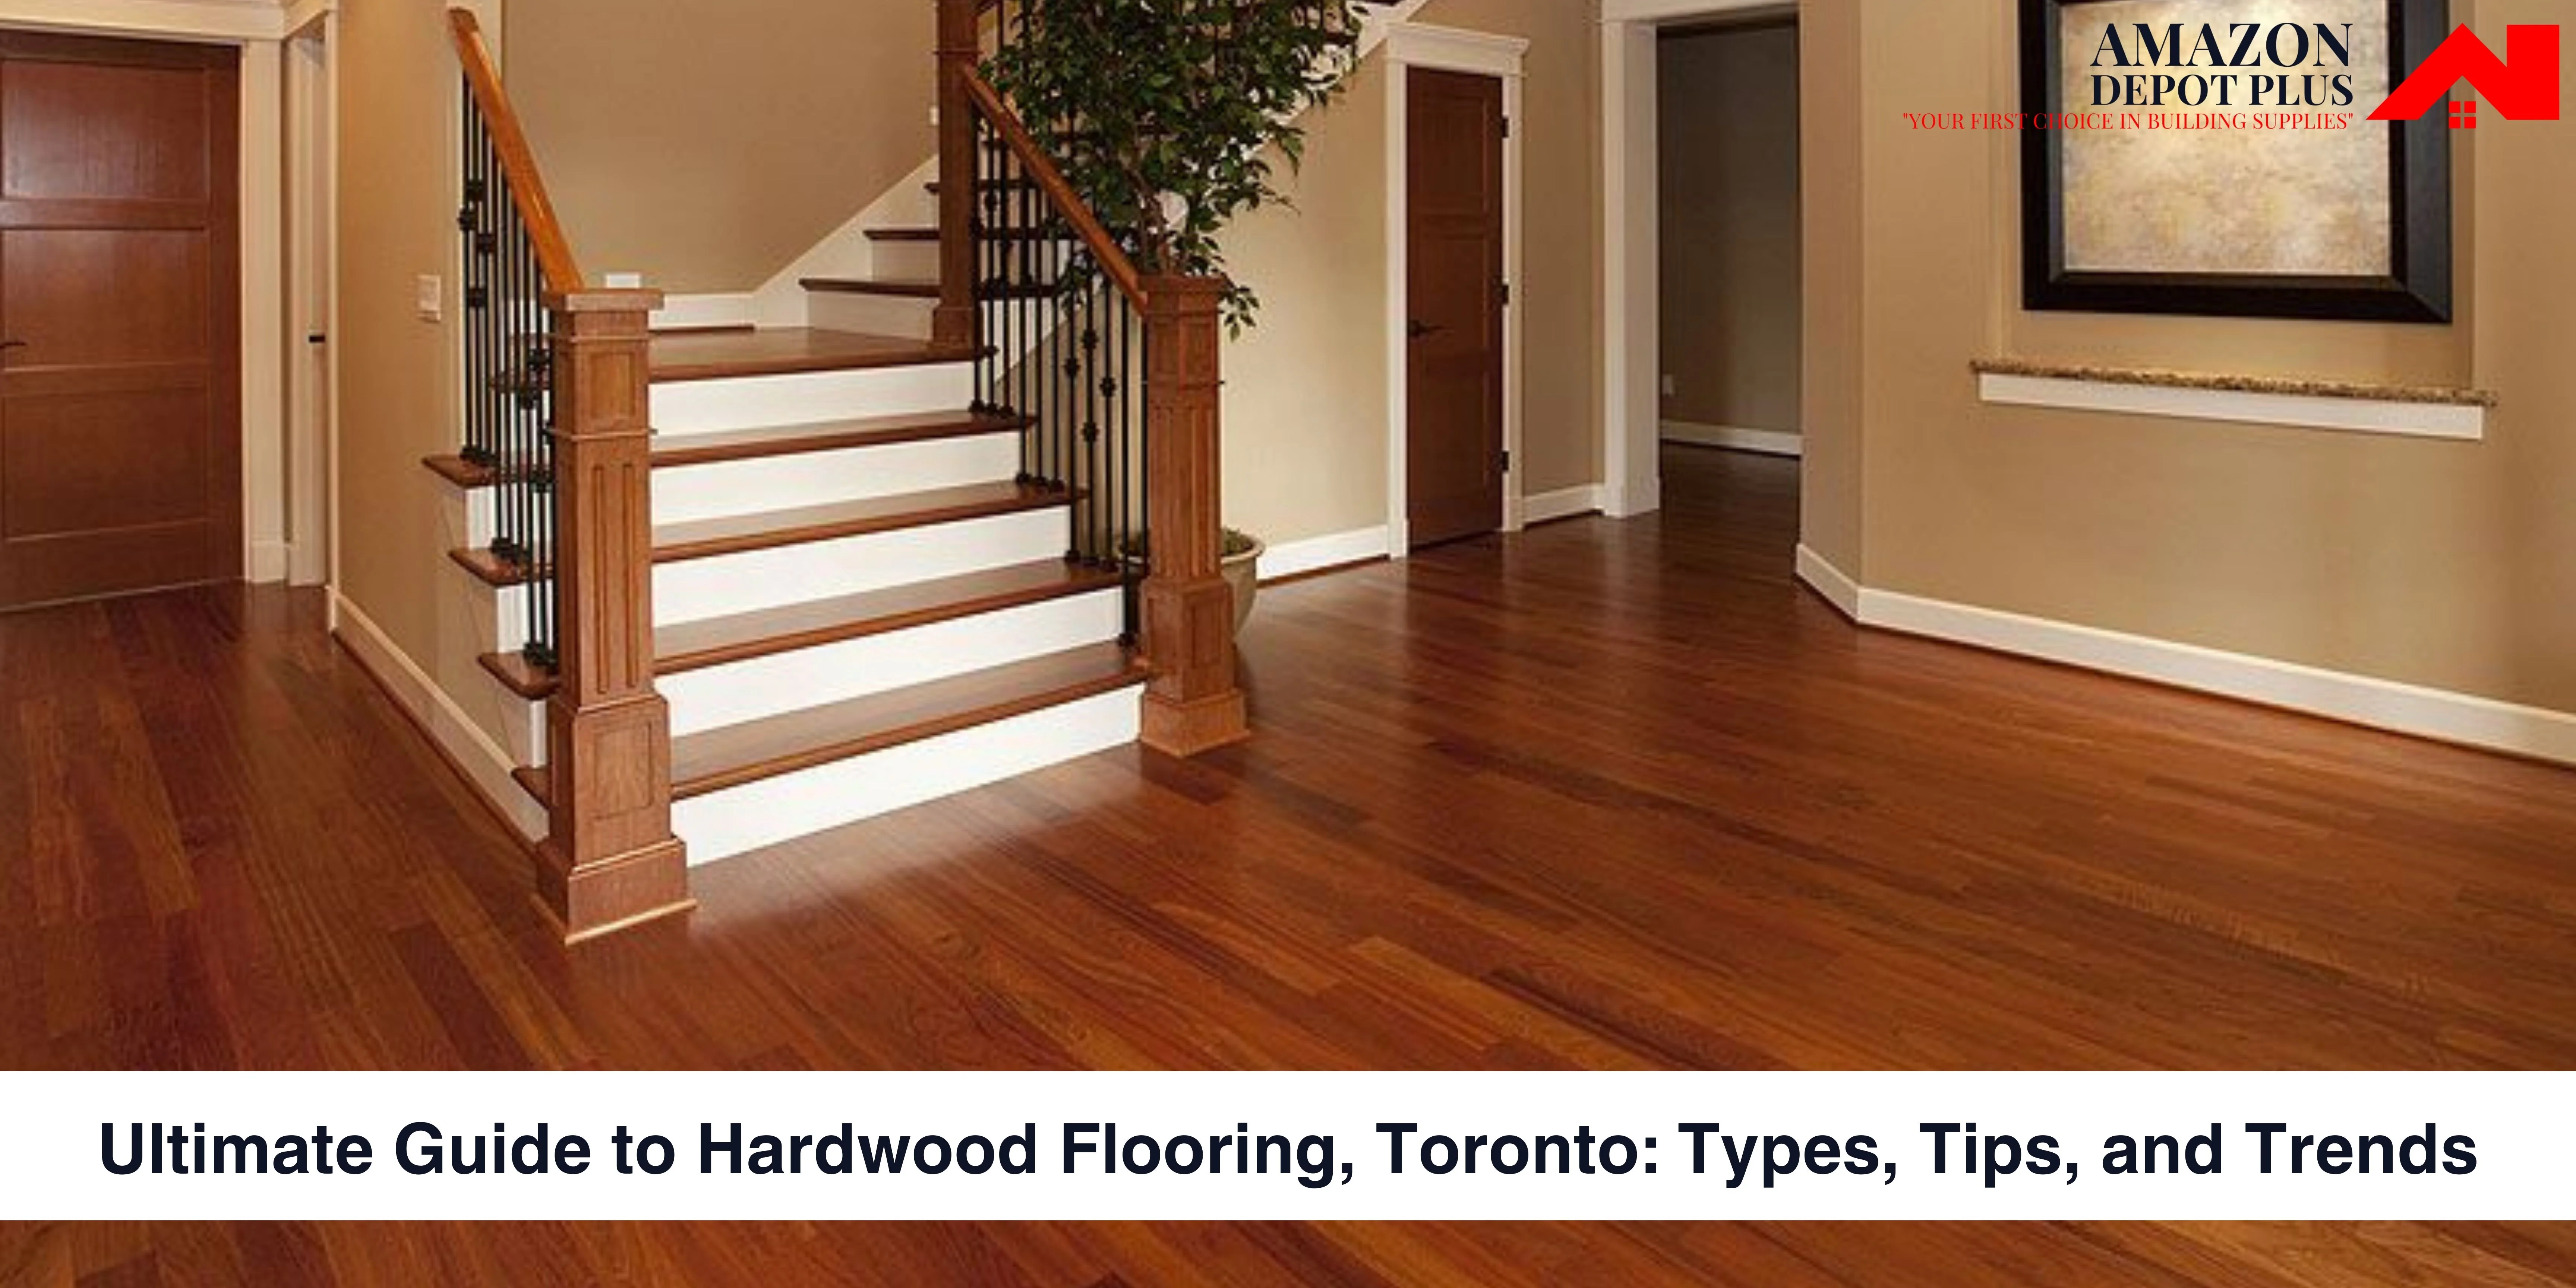 Ultimate Guide to Hardwood Flooring, Toronto: Types, Tips, and Trends